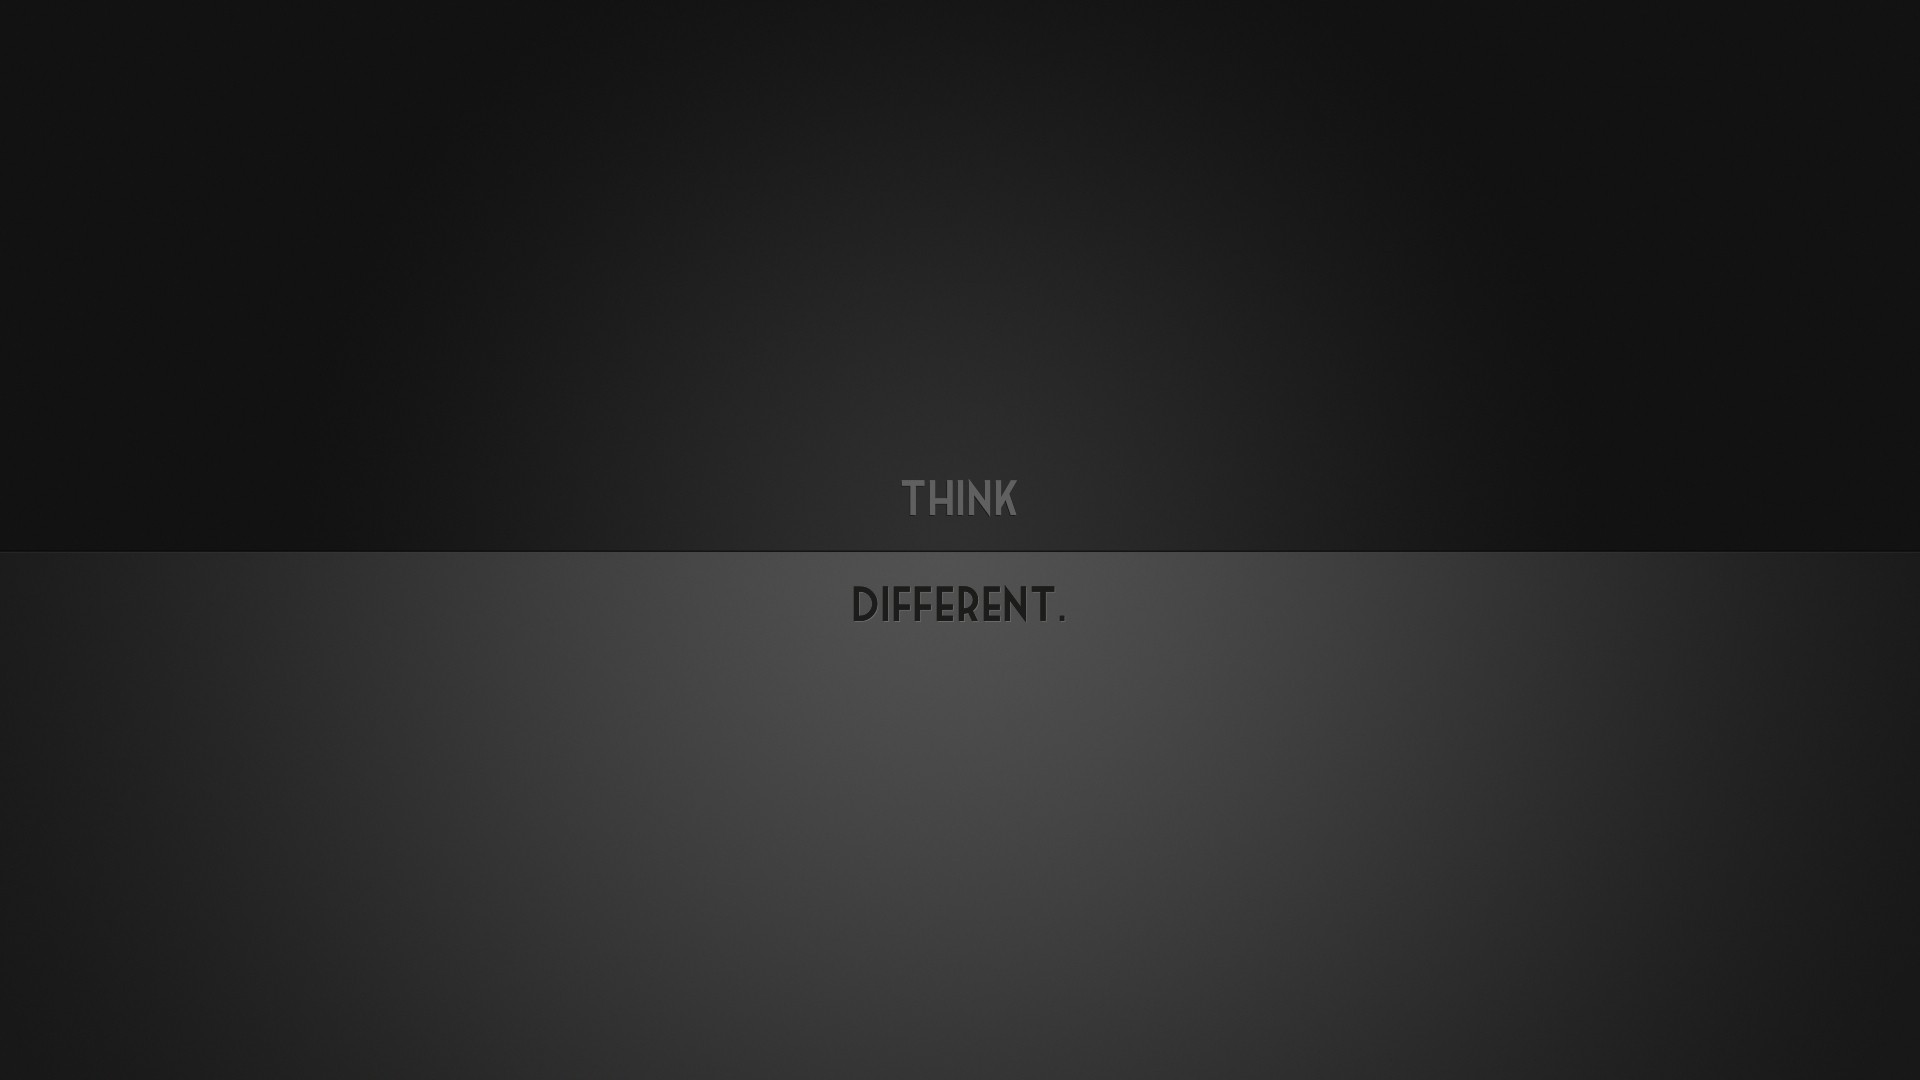 Minimalistic Think Different High Definition Wallpapers Afalchi Free images wallpape [afalchi.blogspot.com]